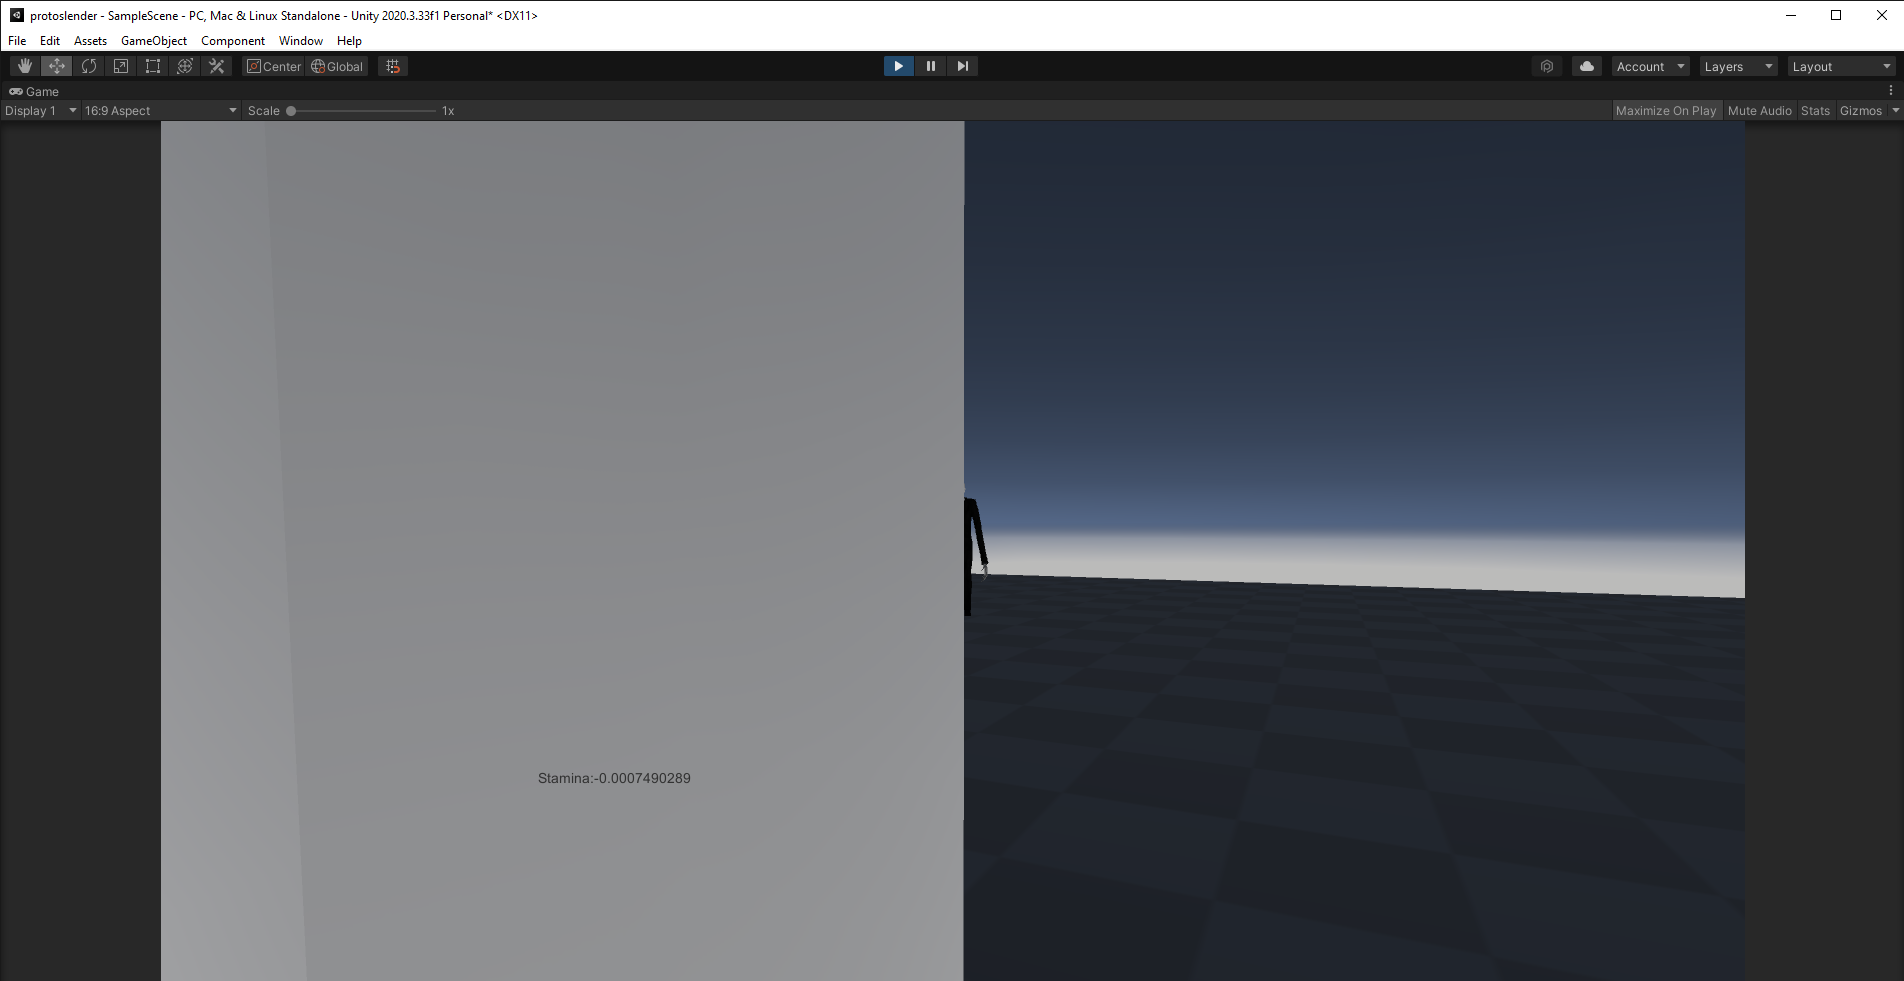 unity - How to hide objects behind an invisible plane? - Game Development  Stack Exchange